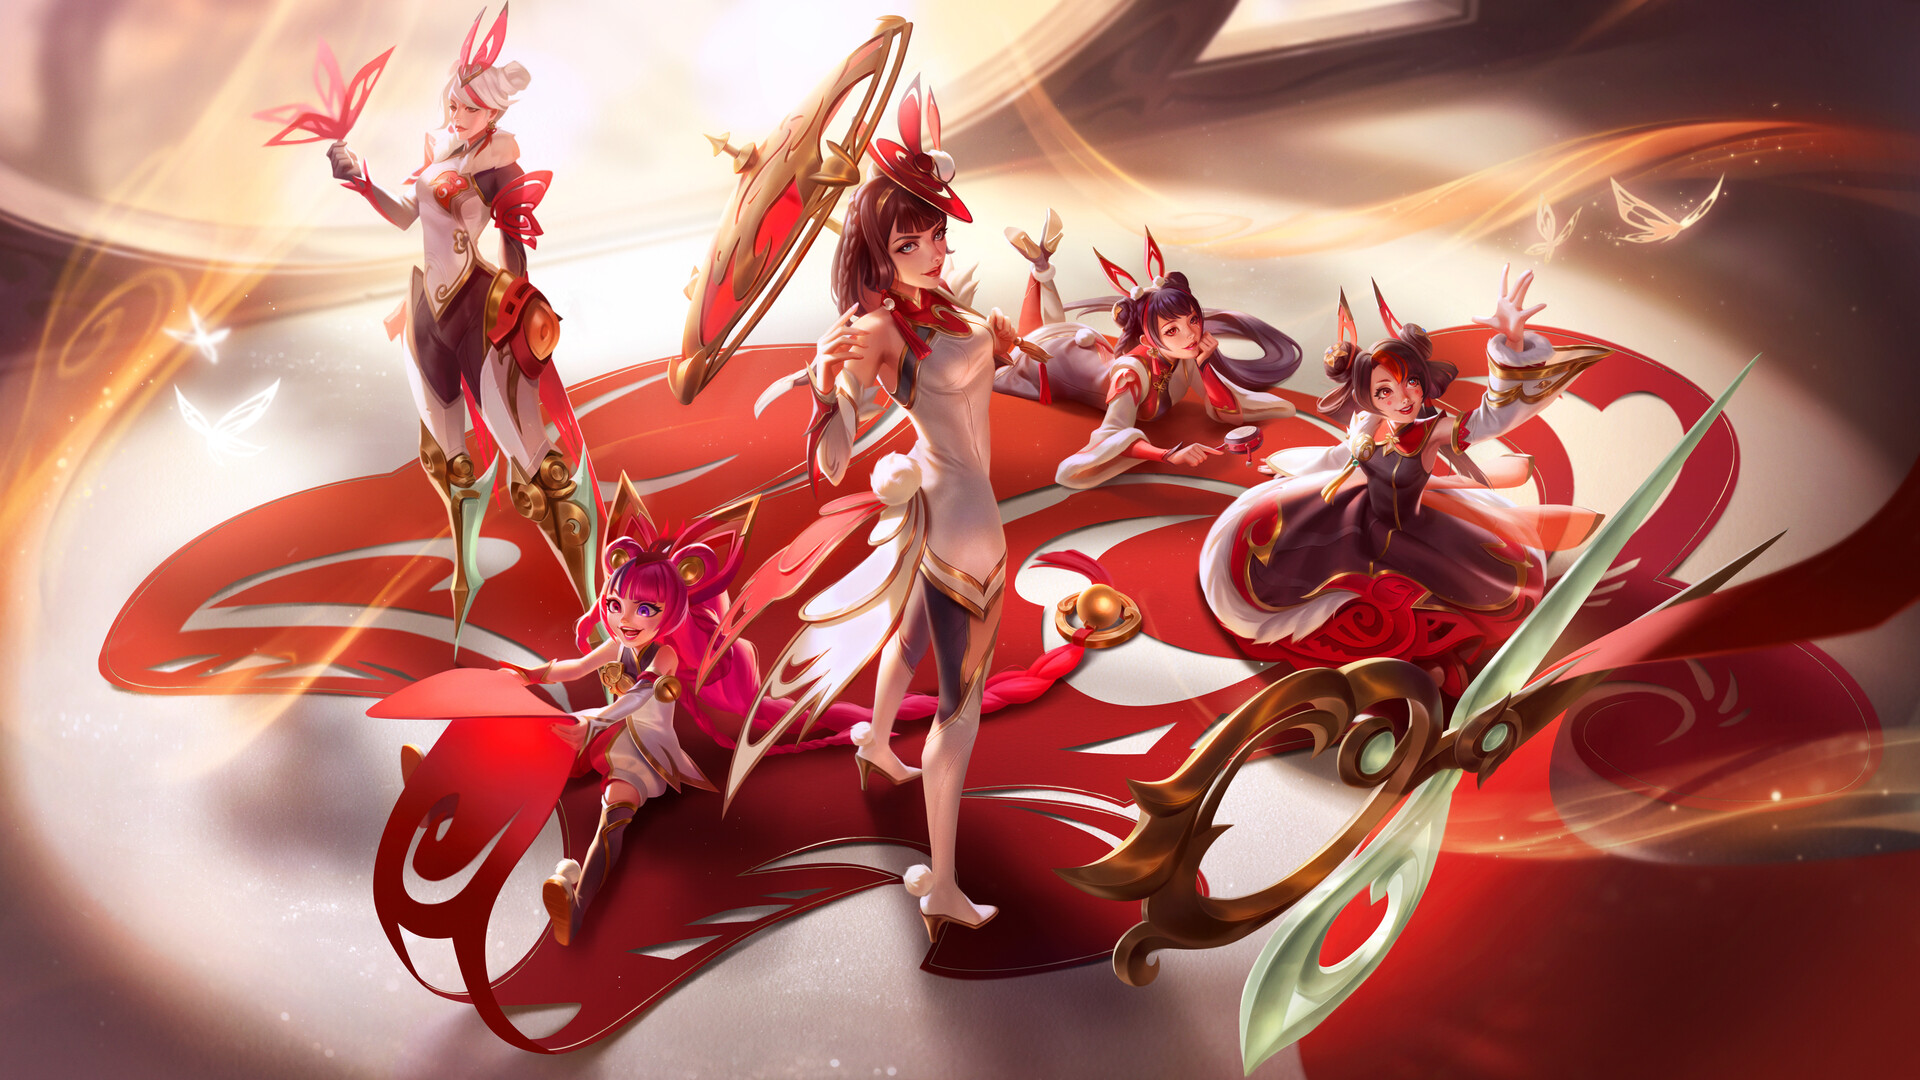 General 1920x1080 Lion Song drawing women League of Legends red video game art gold butterfly white clothing video games video game characters